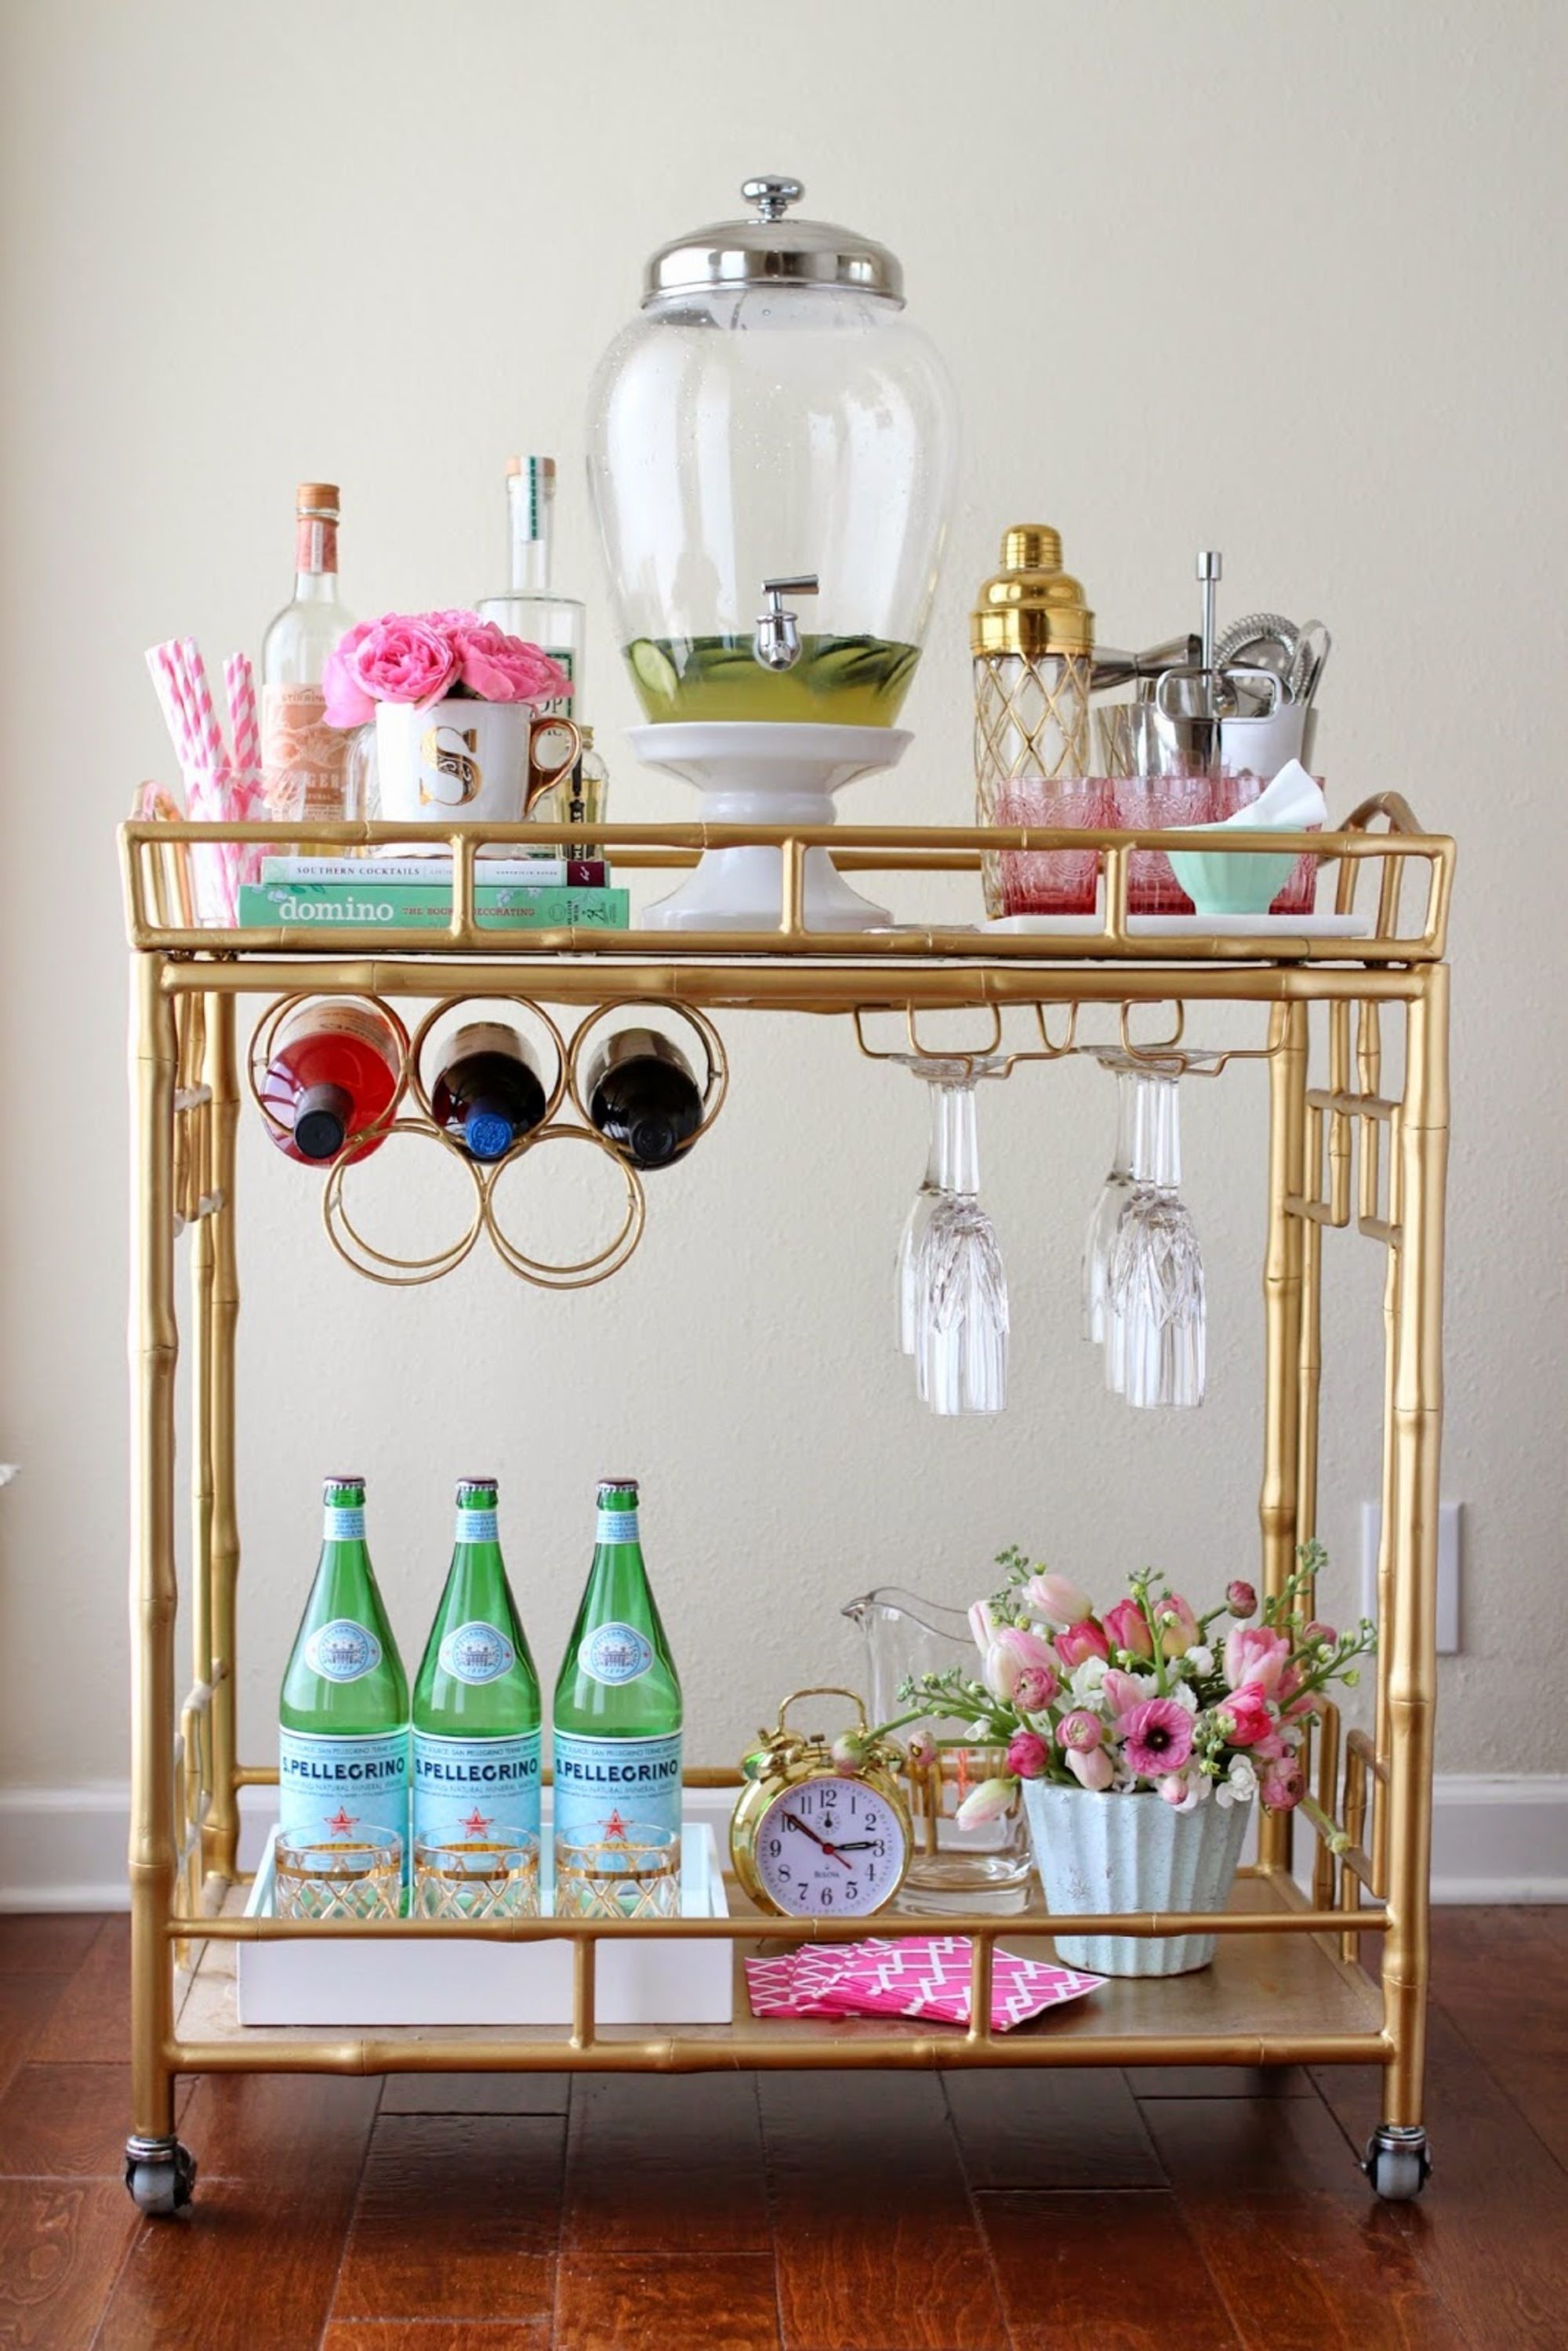 10 Bar Carts for Small Spaces That Will Change Your Decor Forever_1